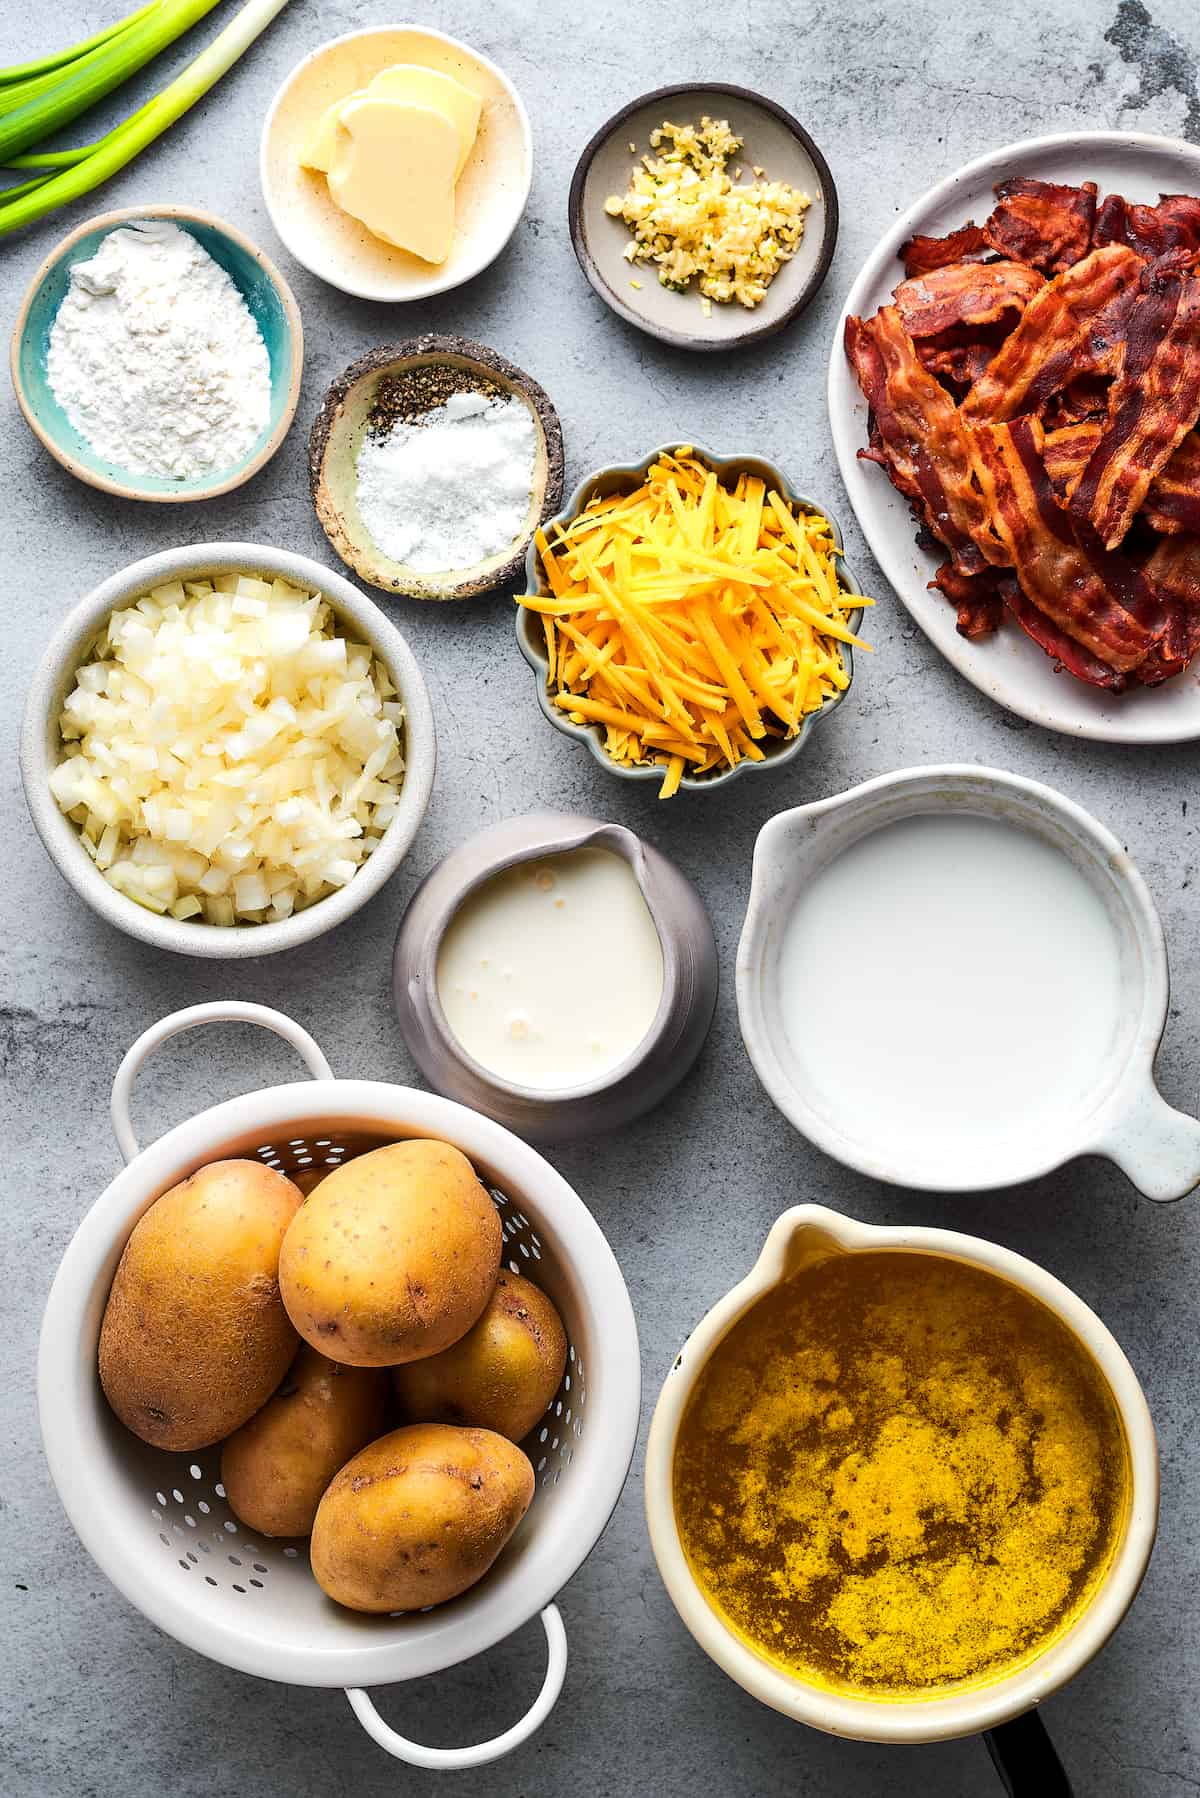 Ingredients for baked potato soup arranged on a work surface.